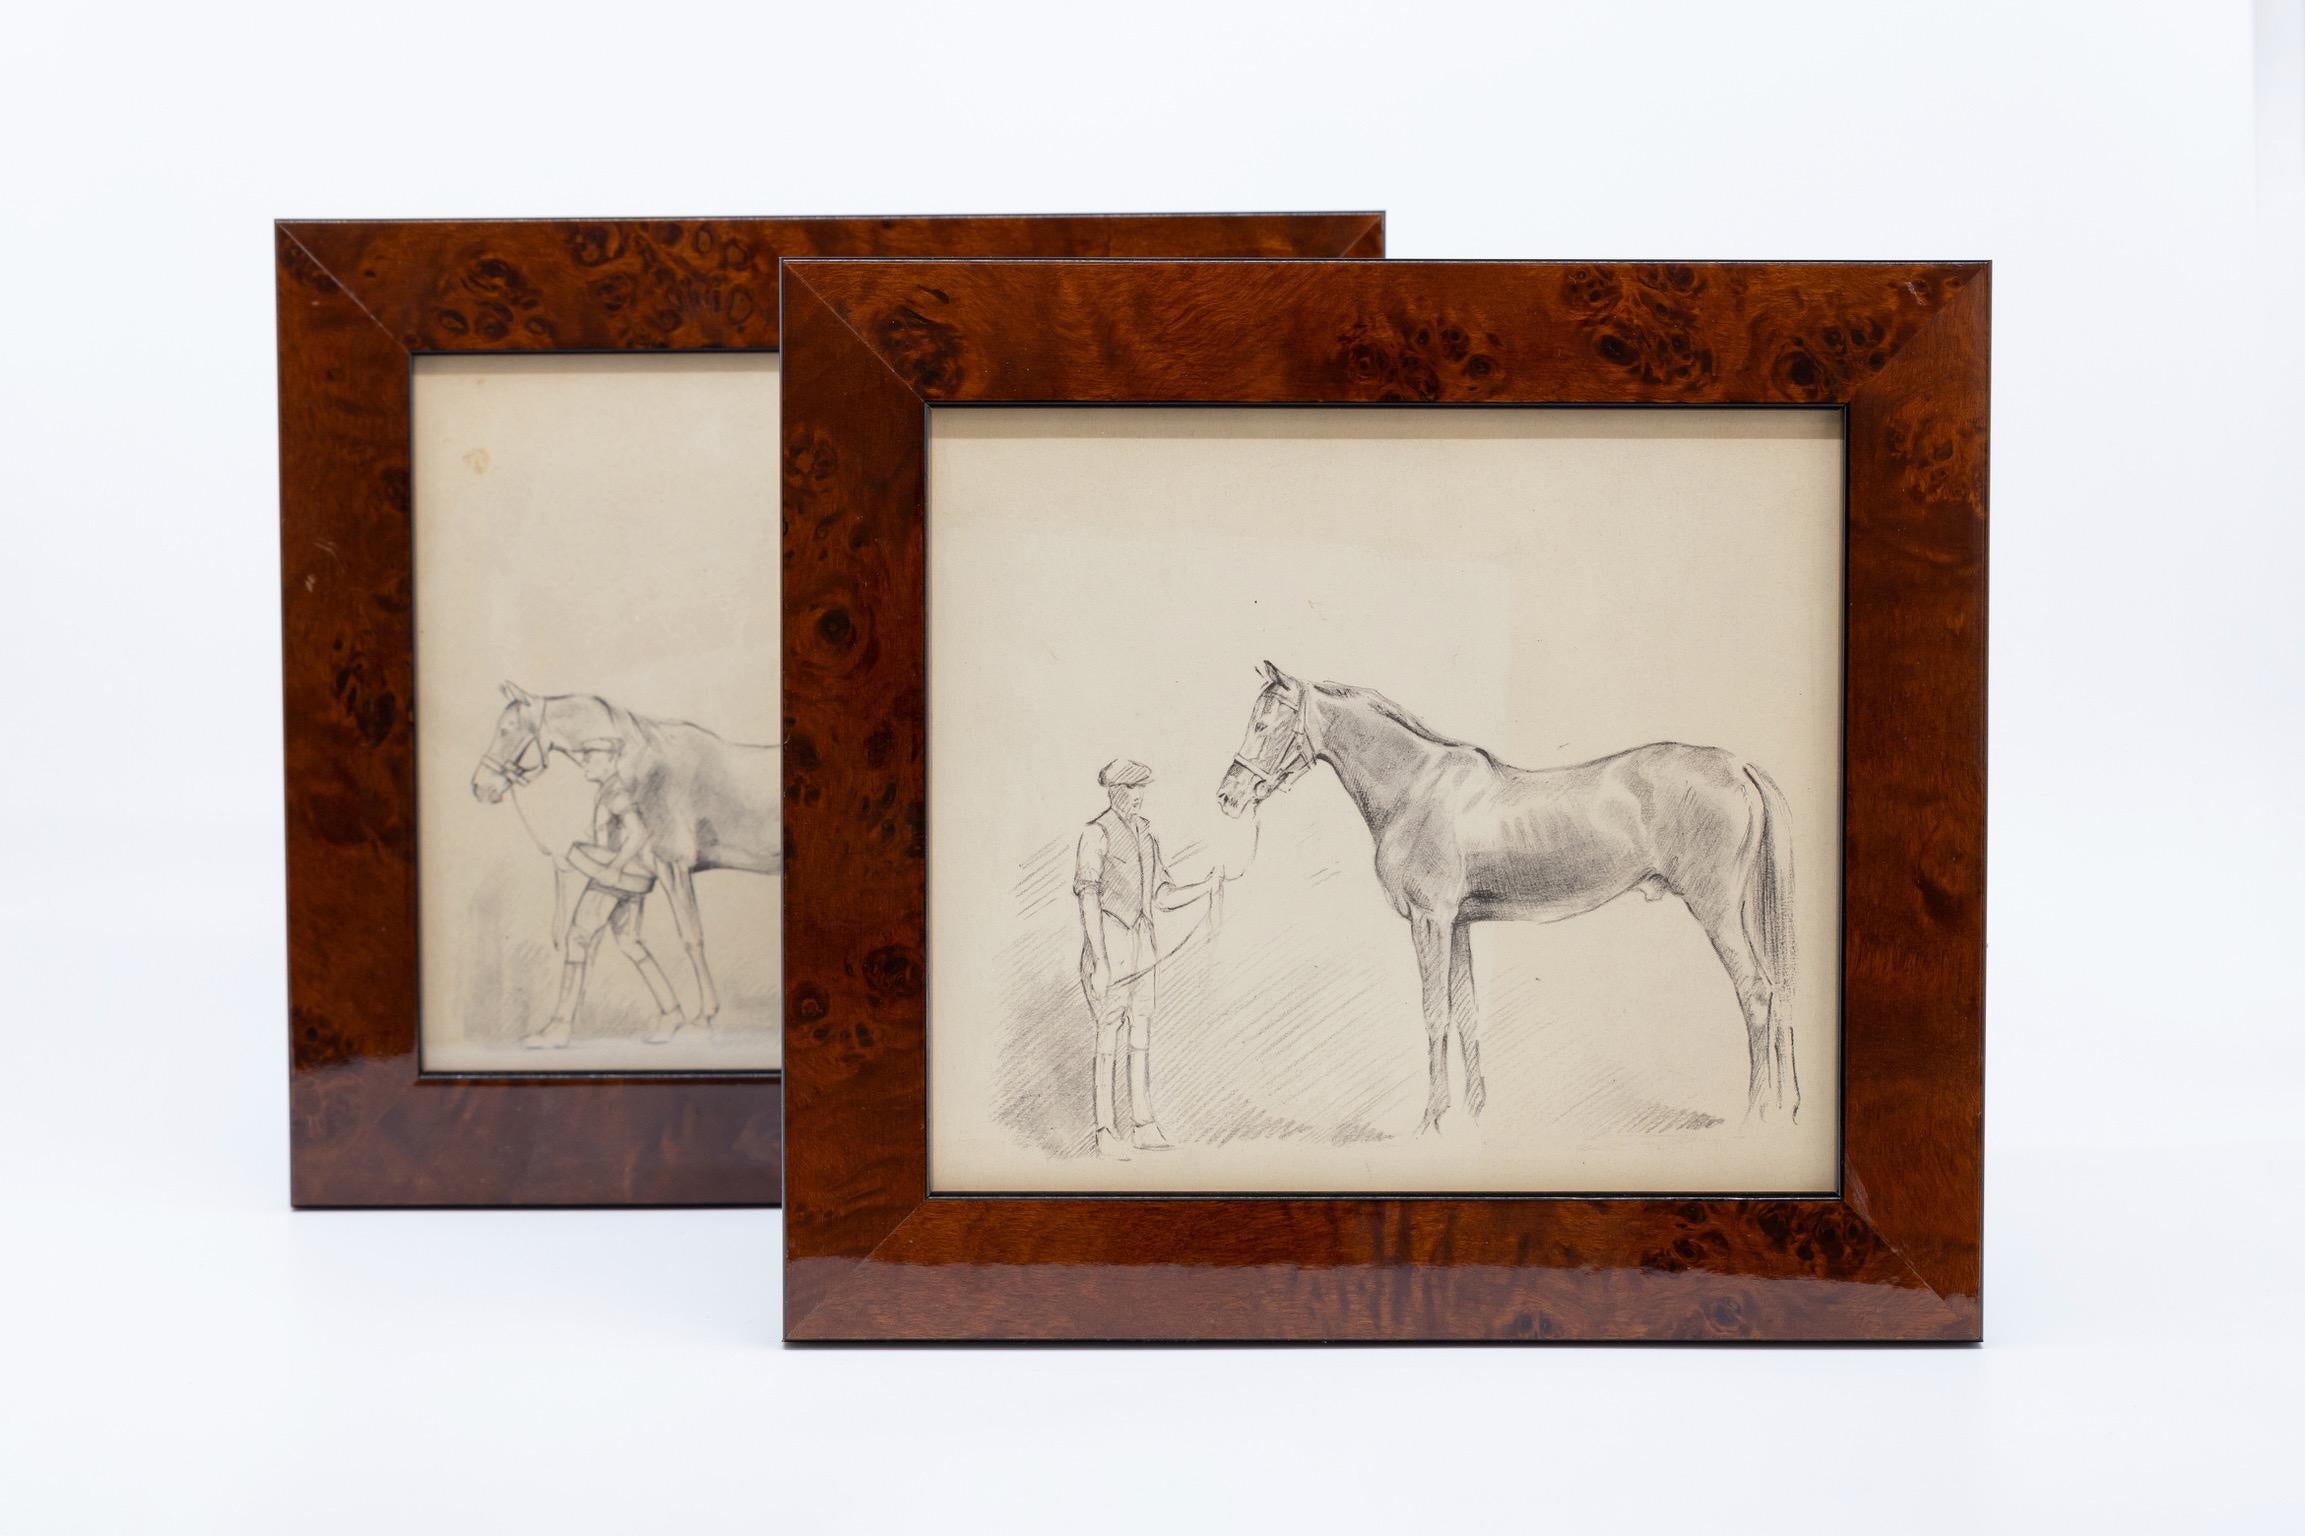 A pair of sketches depicting horses and their caretaker. Beautifully rendered, you can see the subtle shading of the horses, simply drawn. In one of the sketches, the foal follows its mother and the handler. In the second work, the handler is